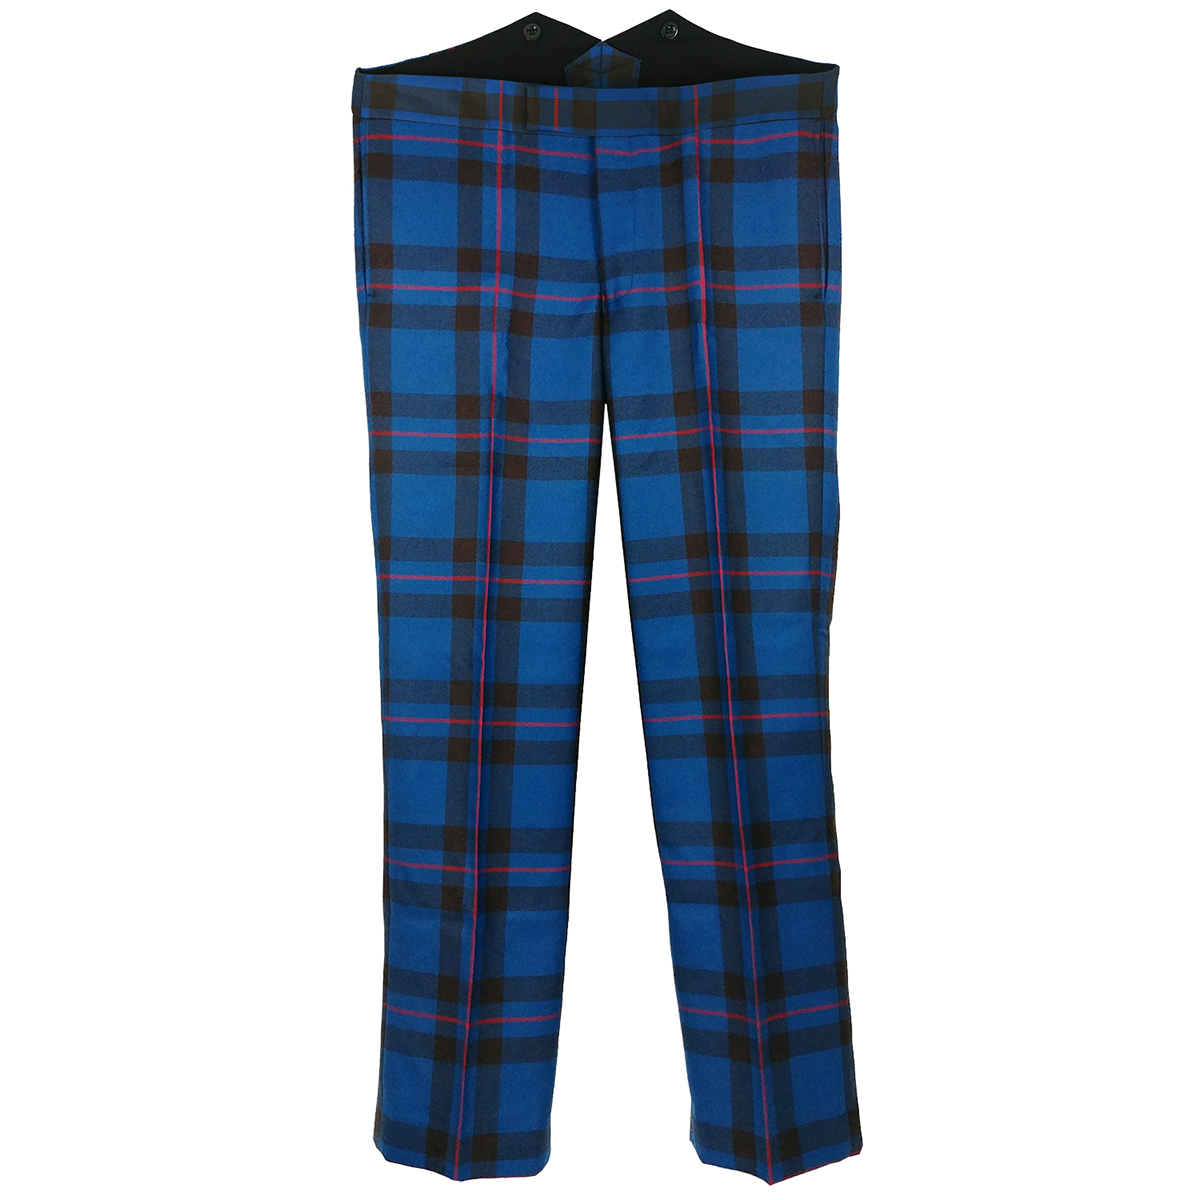 Embroidered Jogging Bottoms - The University of Edinburgh – The University  of Edinburgh Gift Shop